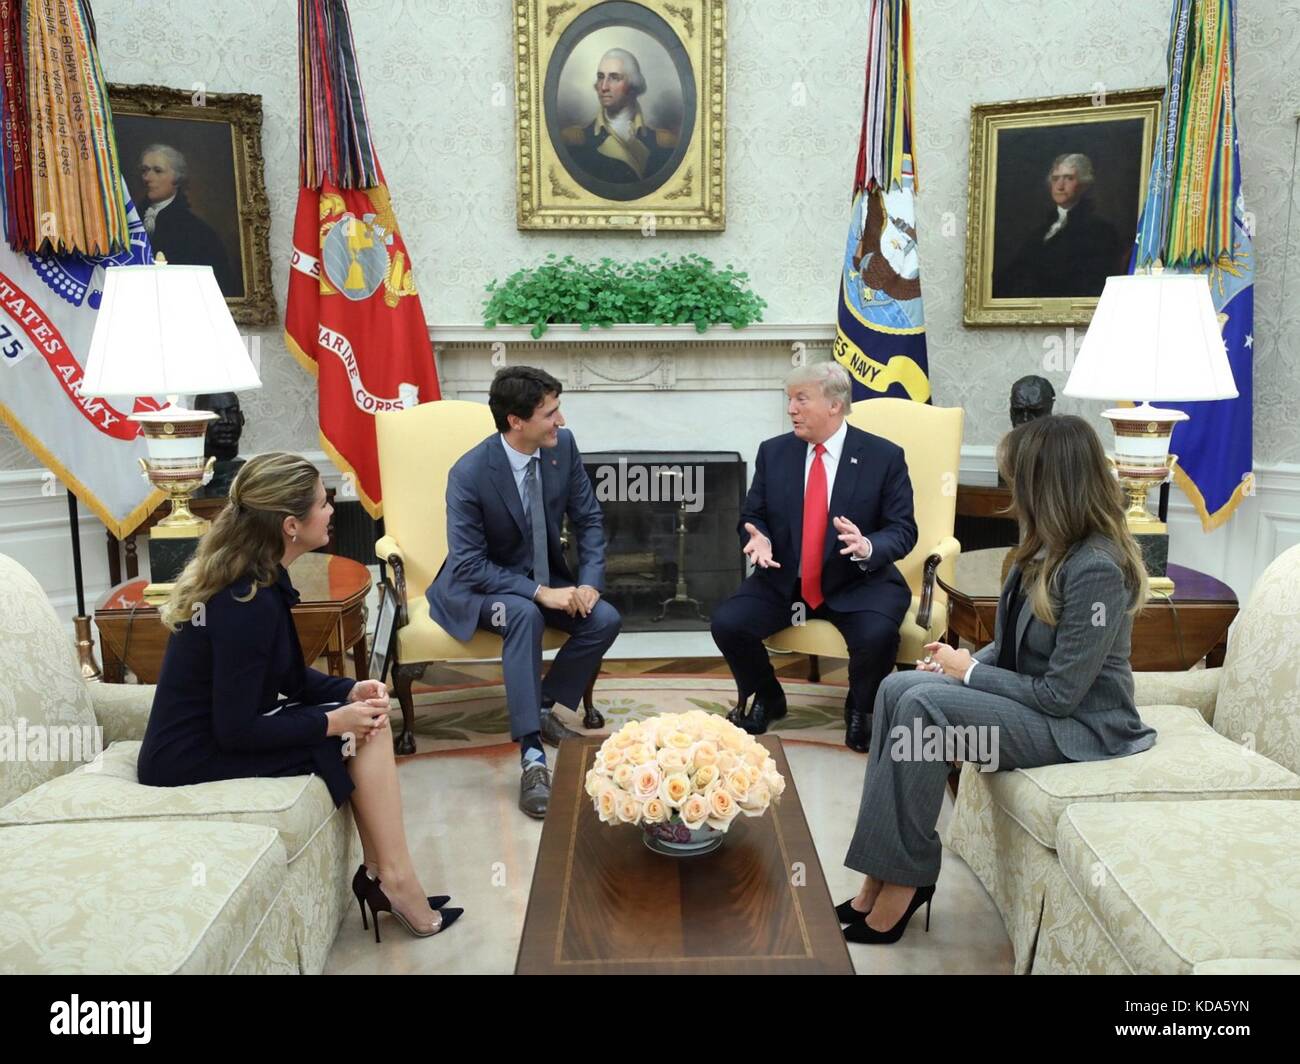 Washington, United States Of America. 11th Oct, 2017. U.S. President Donald Trump and First Lady Melania Trump during a meeting with Canadian Prime Minister Justin Trudeau and his wife Sophie Grégoire Trudeau, left, in the Oval Office of the White House October 11, 2017 in Washington, DC. Credit: Planetpix/Alamy Live News Stock Photo